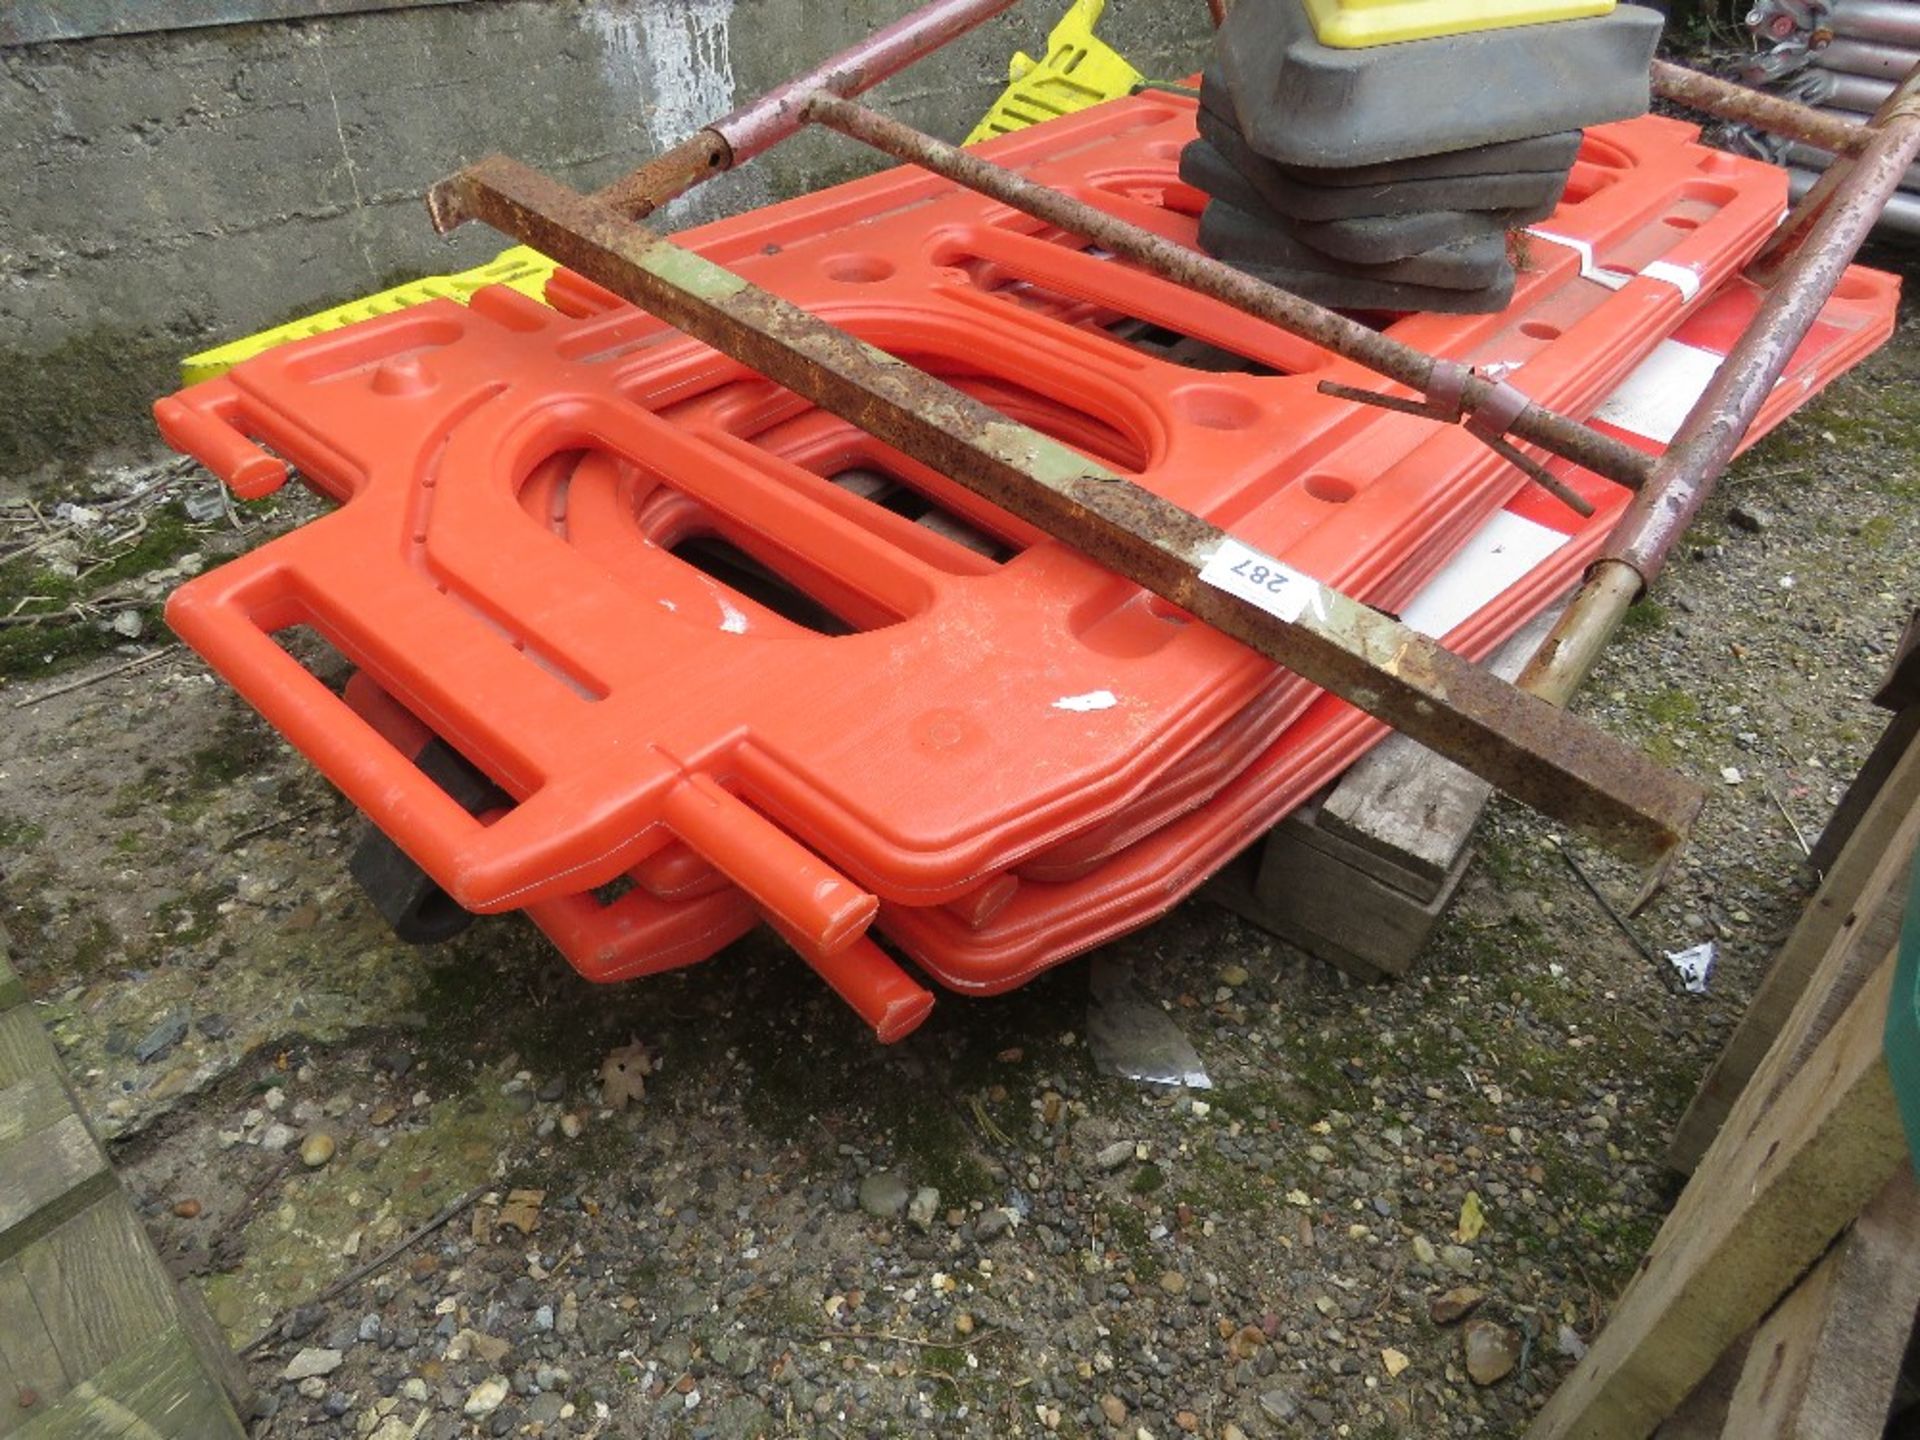 3 X PLASTIC CHAPTER 8 BARRIERS, BUILDER'S TRESTLE PLUS 6X ROAD CONES. - Image 2 of 2